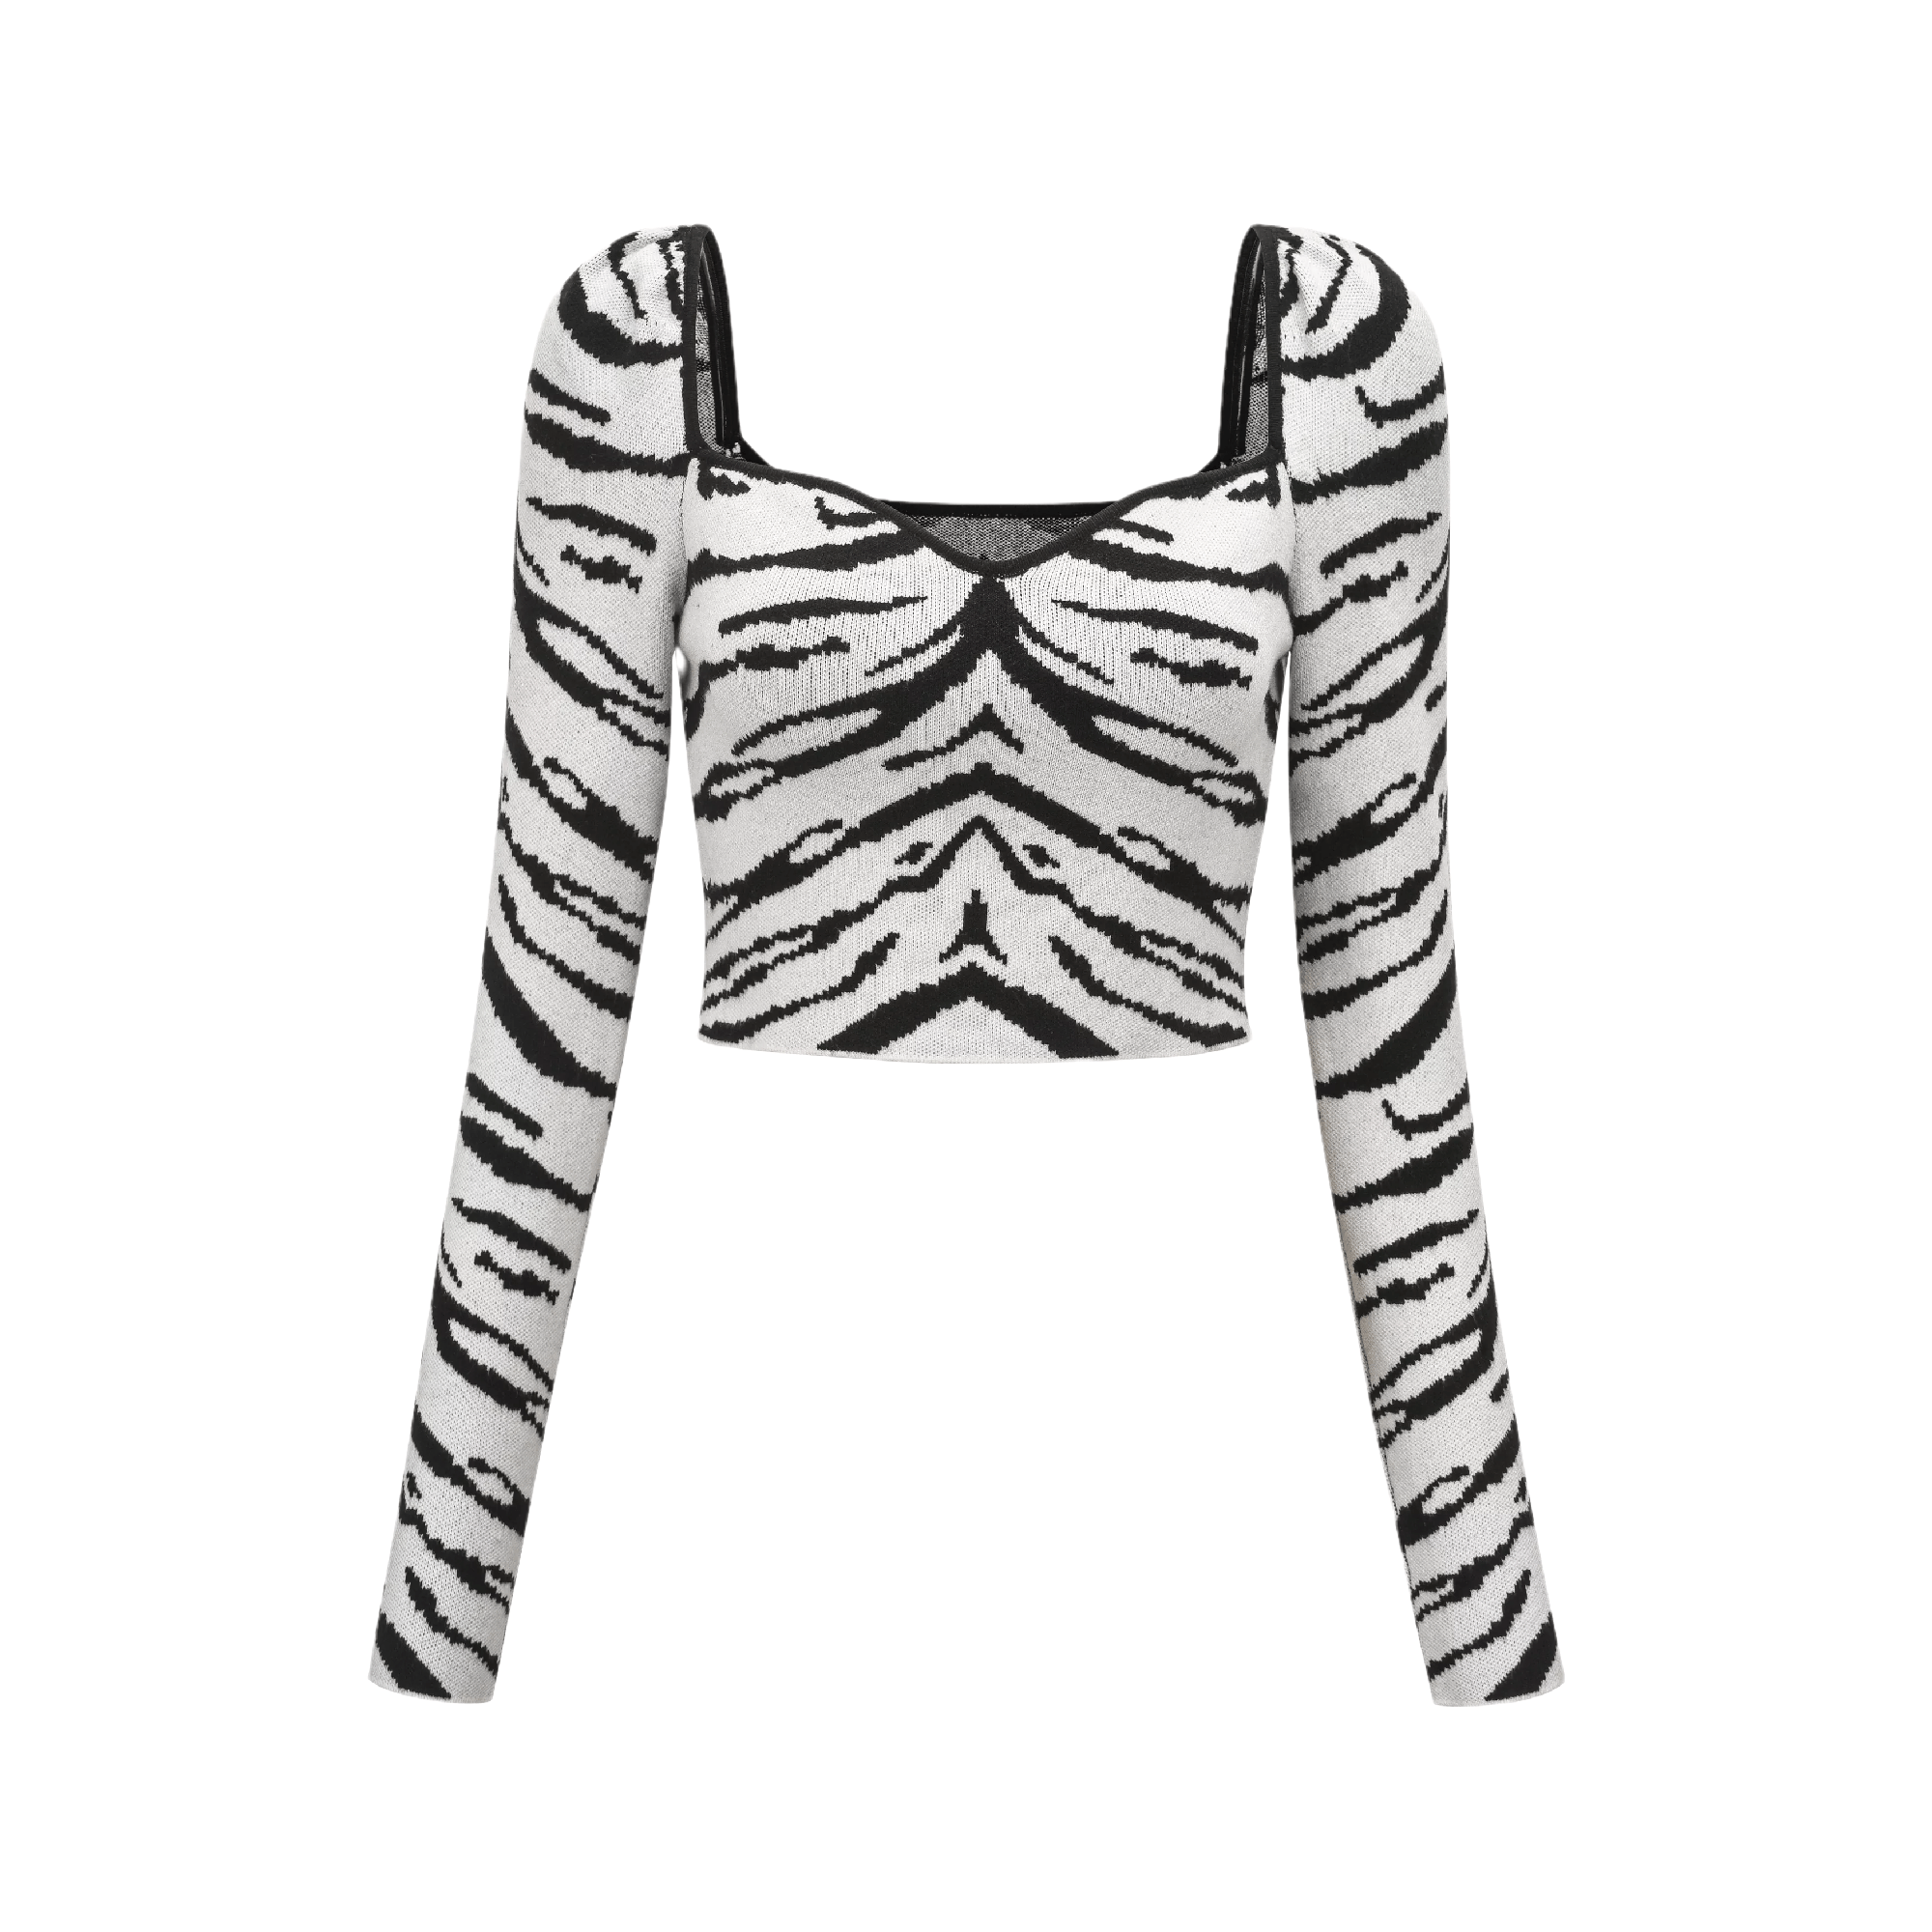 What You Waiting For-Zebra striped crop top - itsy, it‘z different